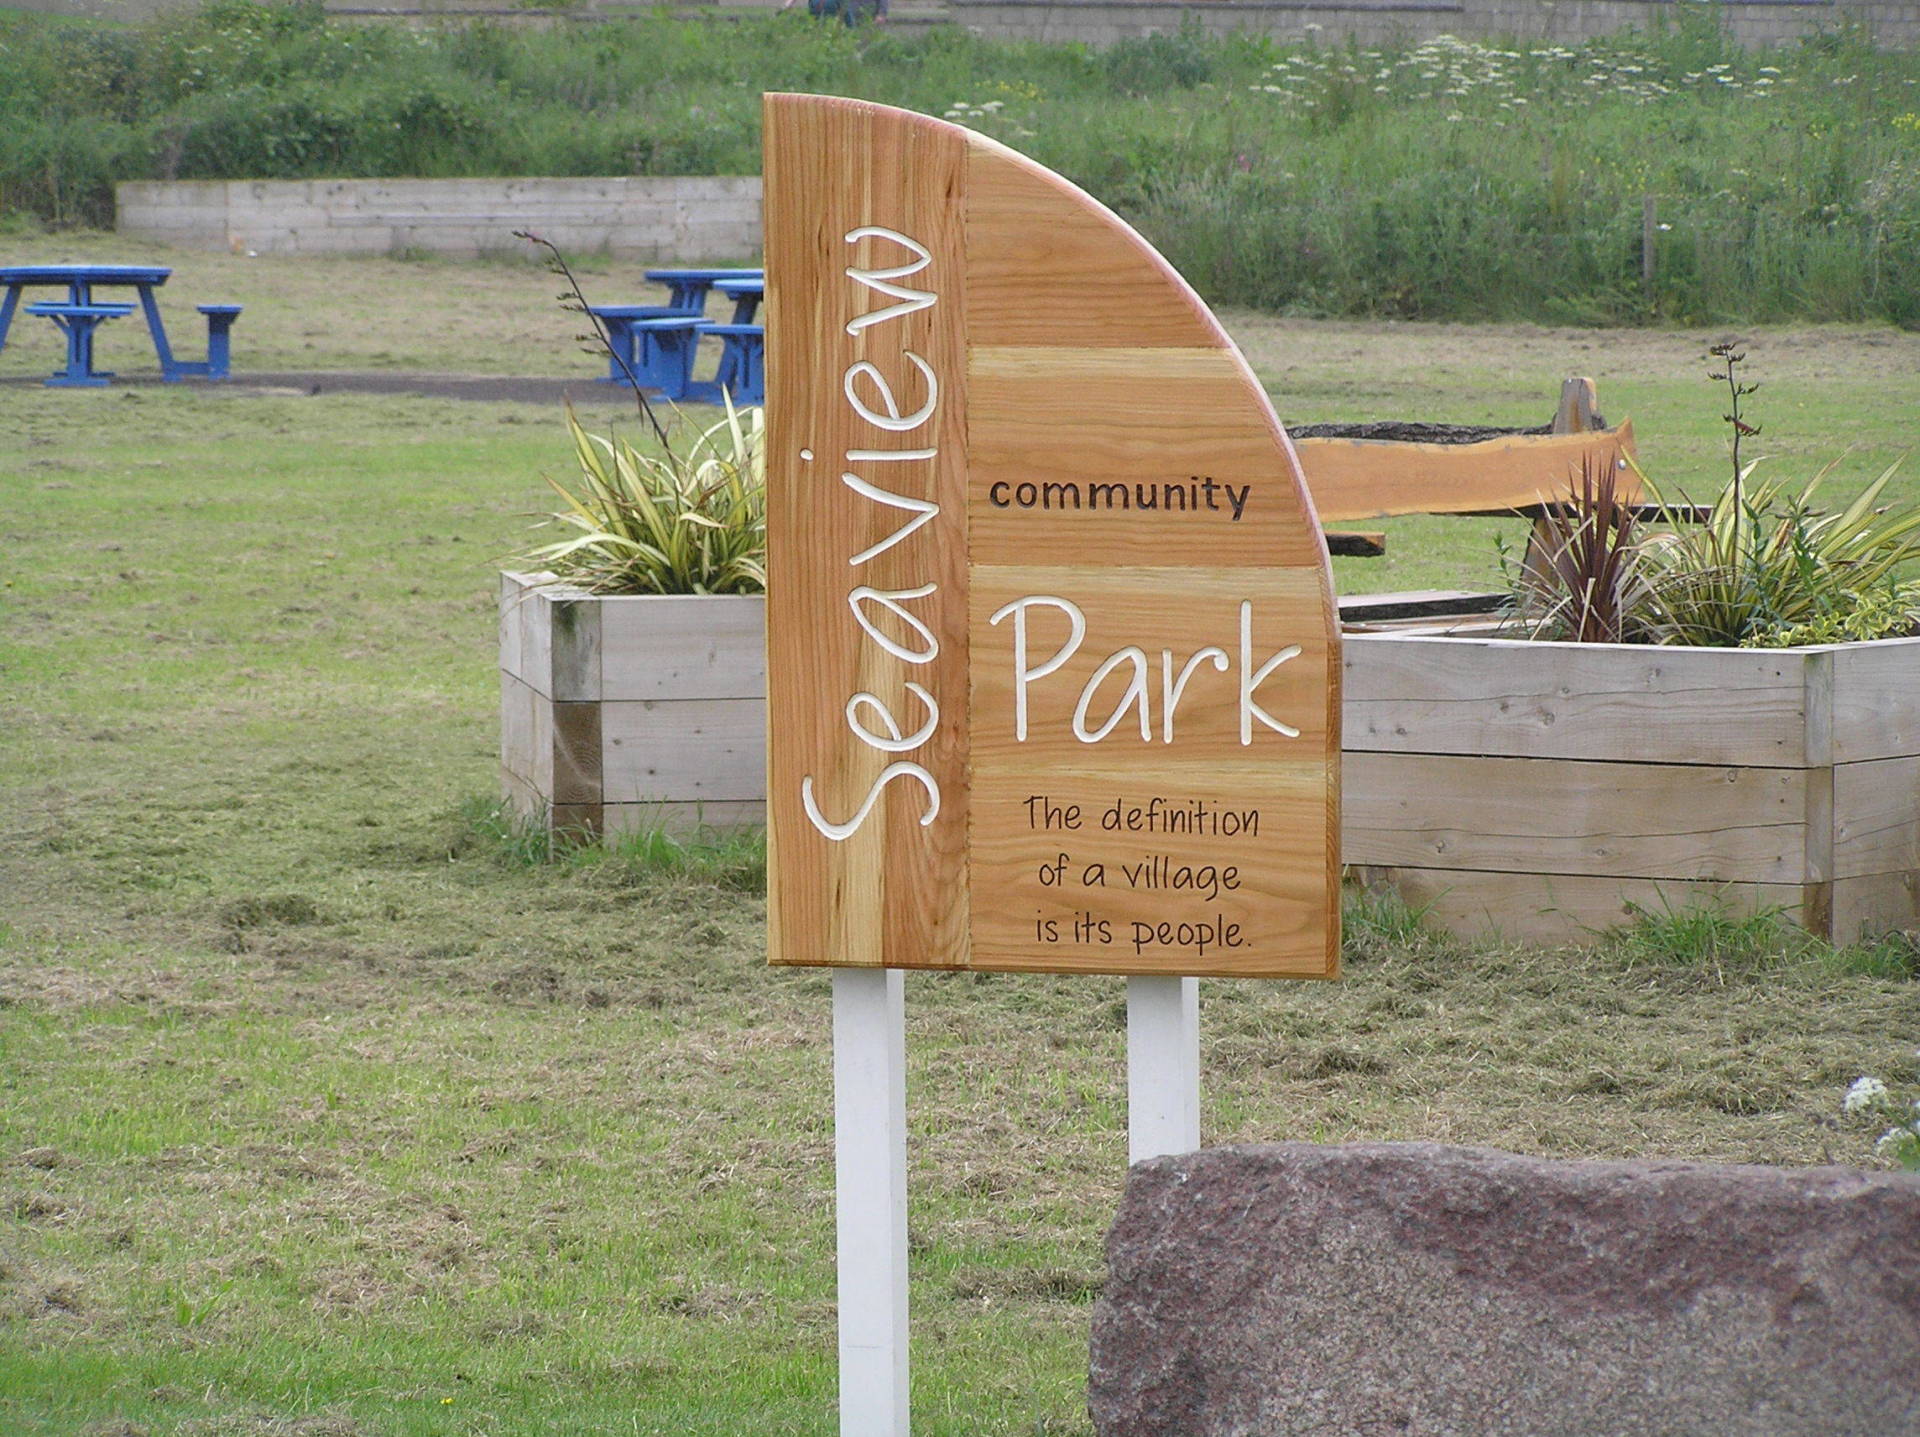 Eco-friendly community park and garden sign